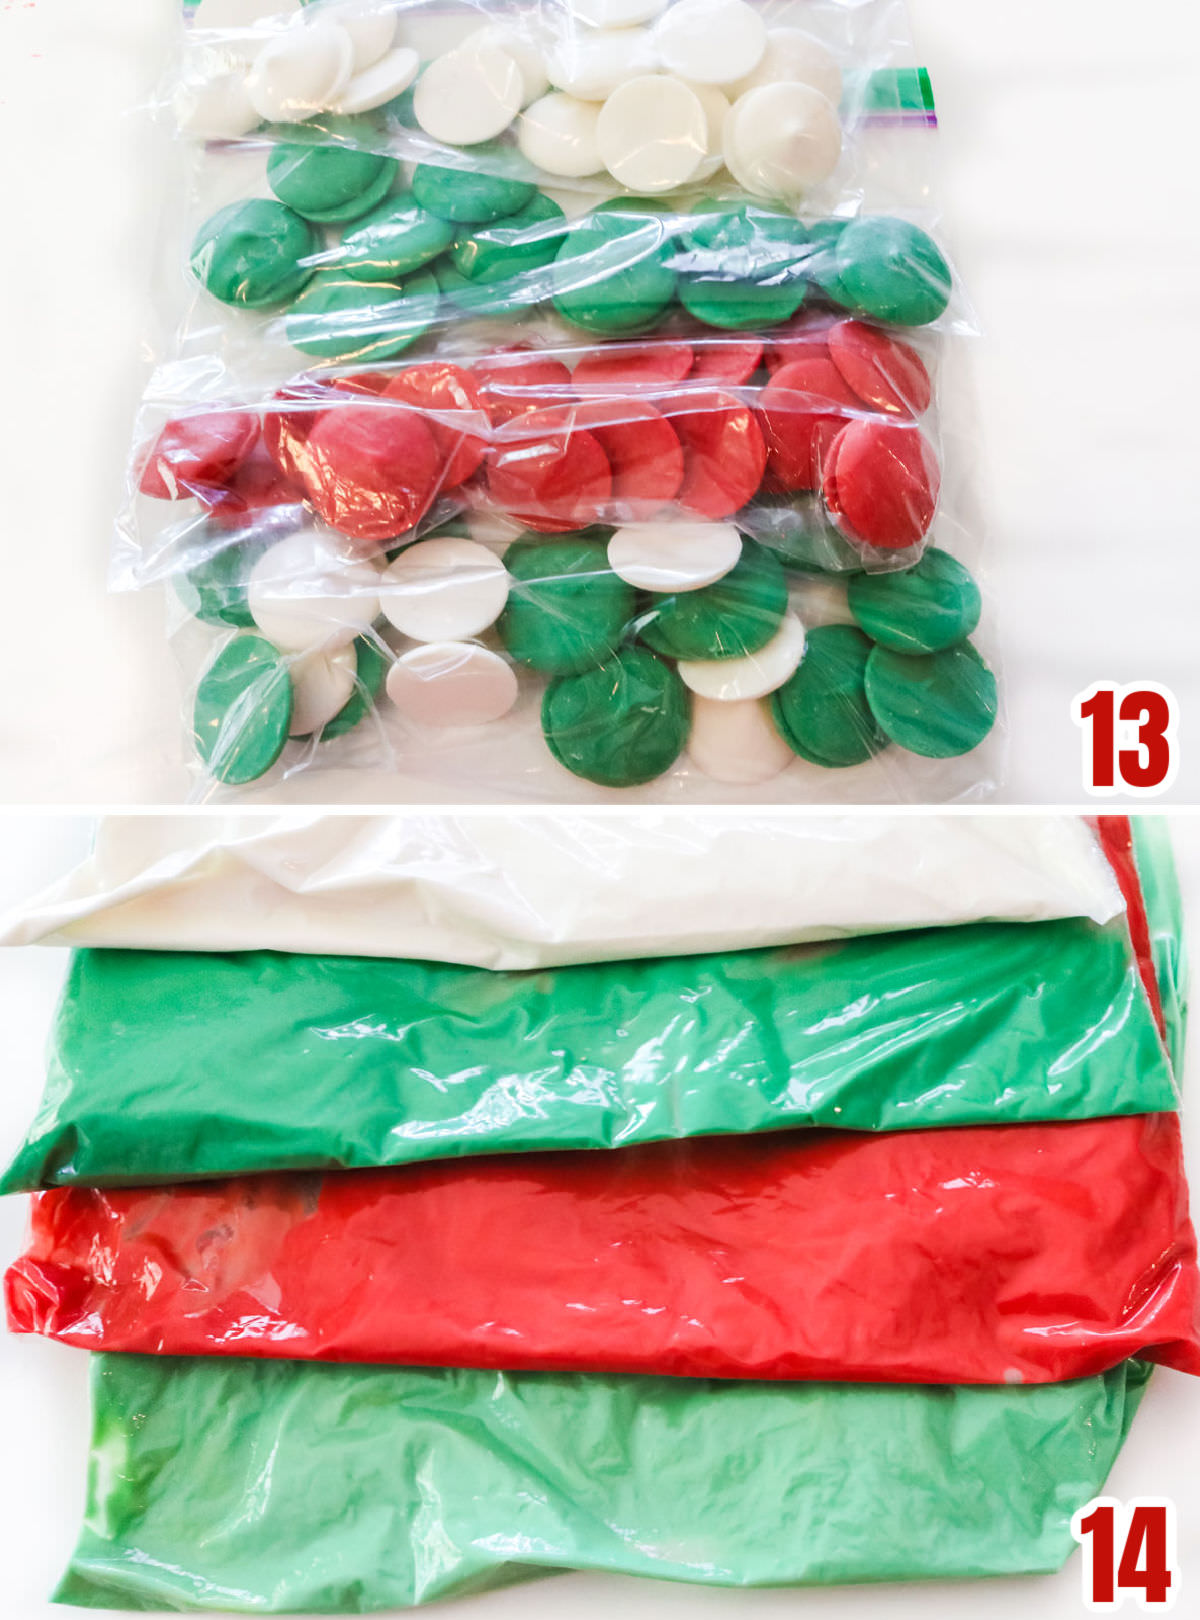 Collage image showing tips and tricks for melting Candy Melts.